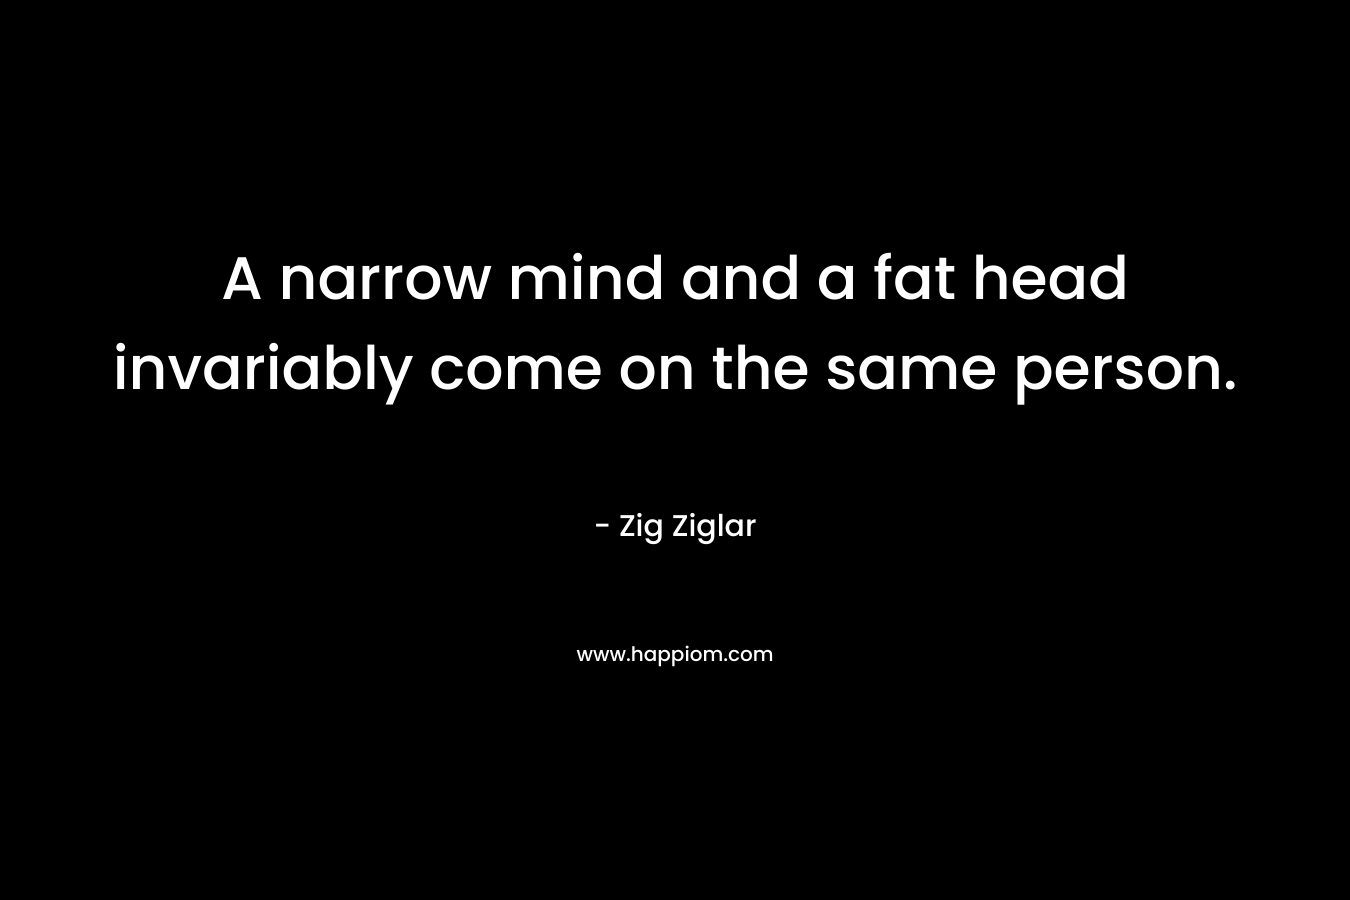 A narrow mind and a fat head invariably come on the same person.